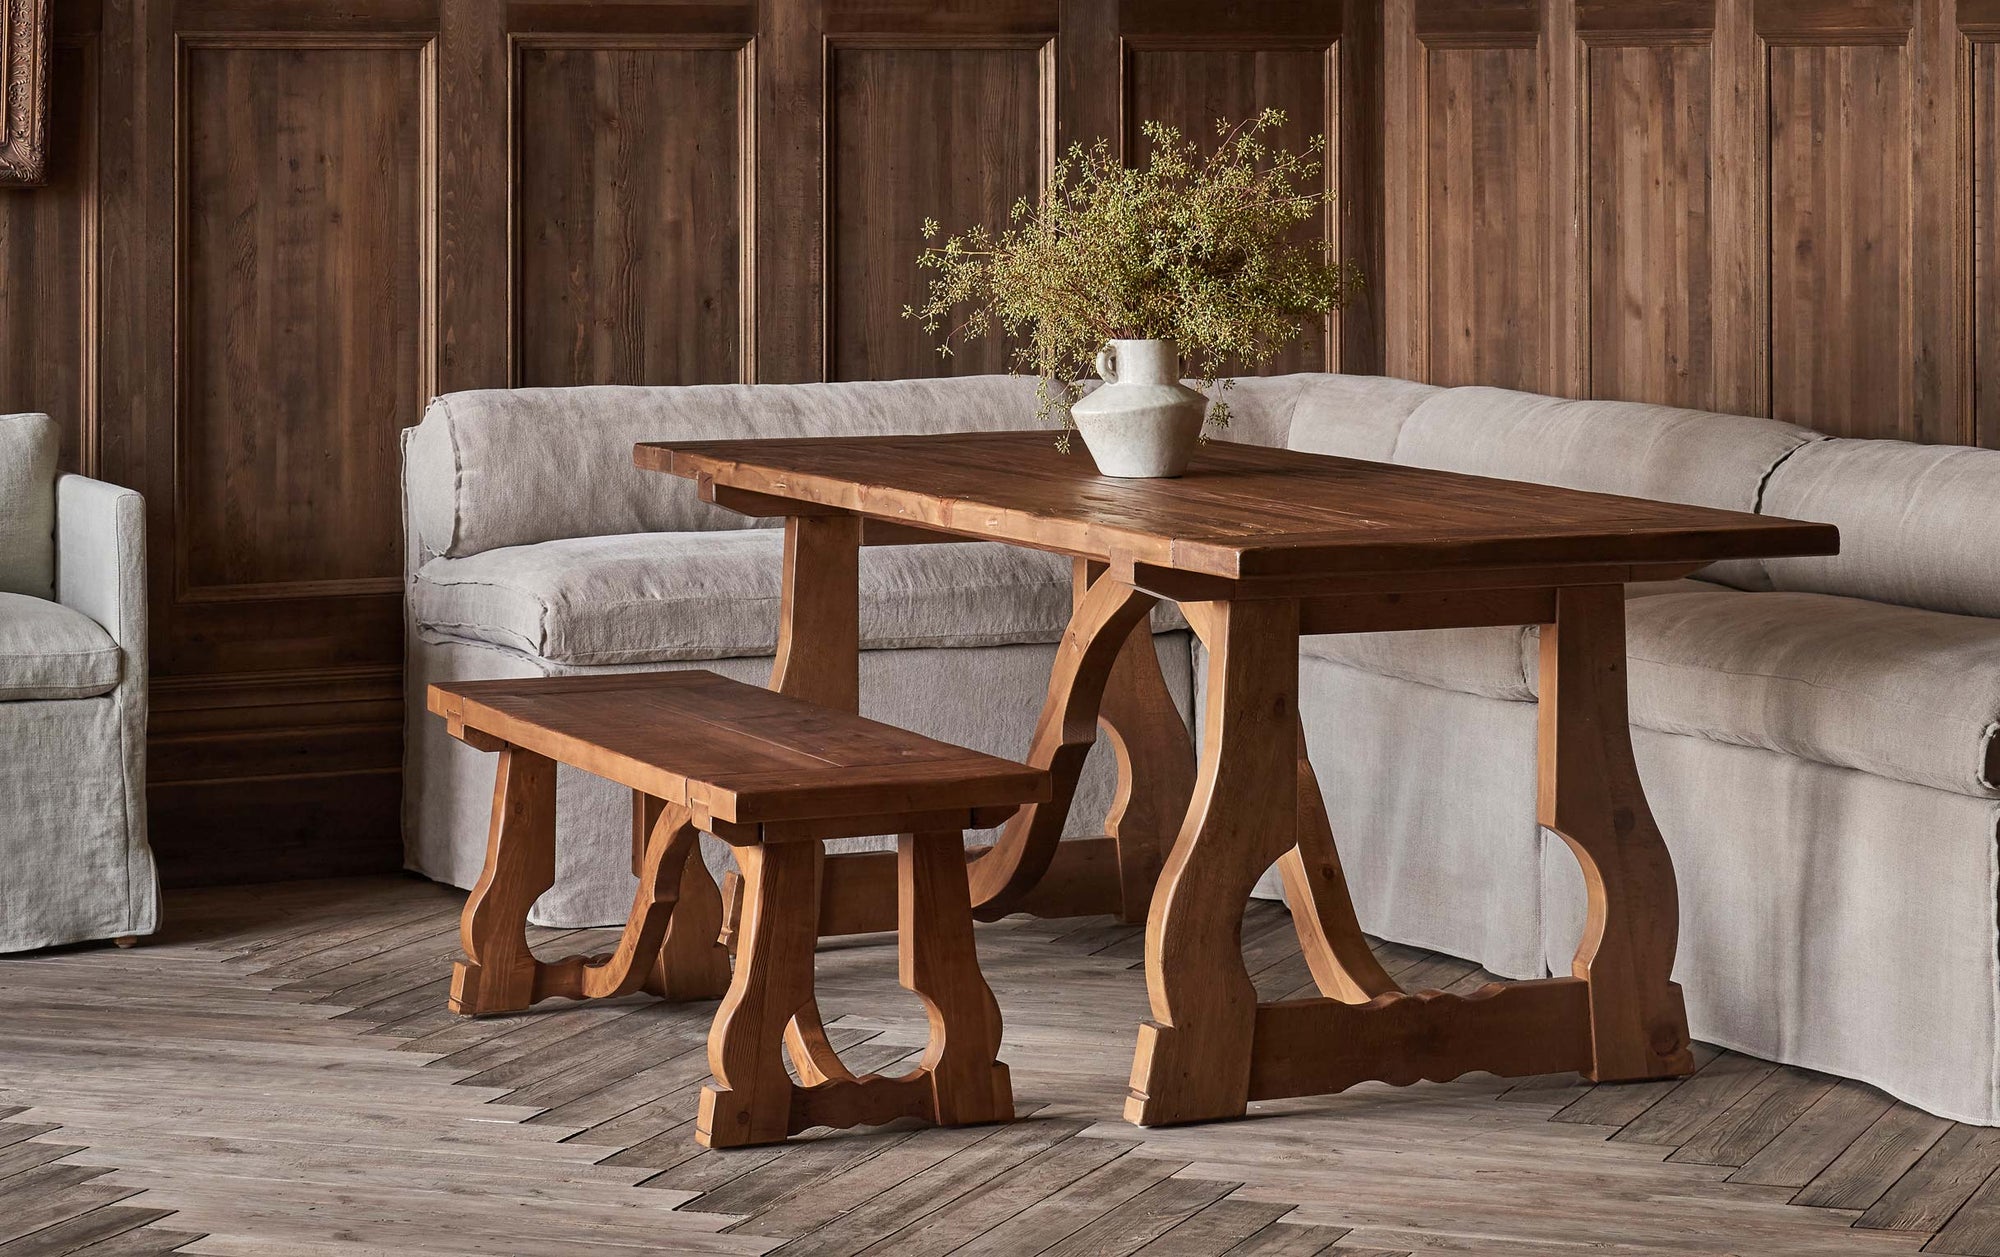 Leona Dining Bench in 100% Reclaimed Chinese Heritage Pine, a medium, bosc pear shade with earthy undertones, placed in a wood paneled room, around a Leona Dining Table with a Camino Banquette